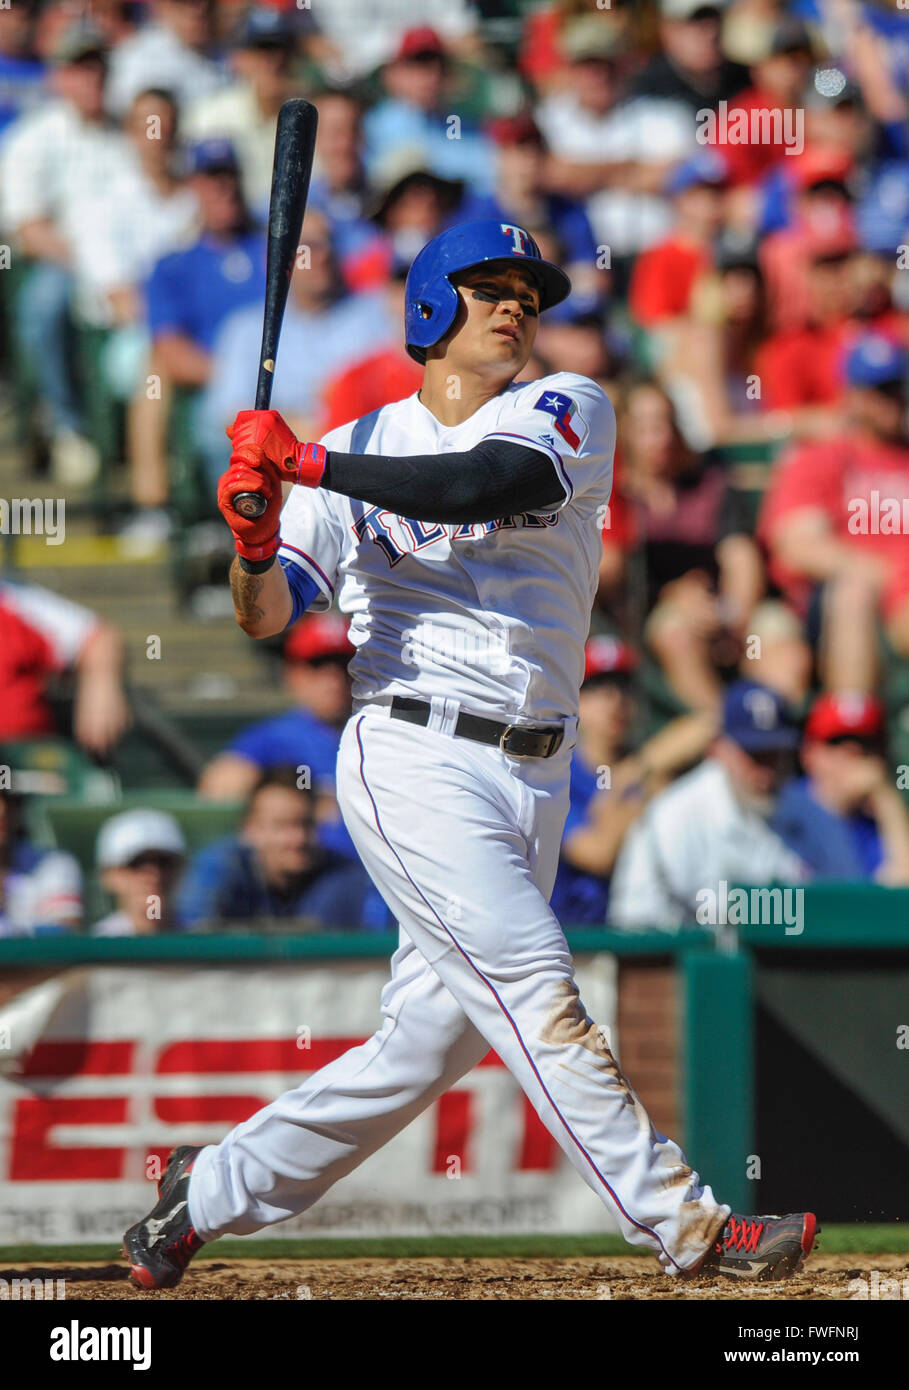 APR 04, 2016: Rangers right fielder Shin-Soo Choo #17 during an MLB game the Seattle Mariners and the Texas Rangers at Globe Life in Arlington, TX Texas defeated Seattle